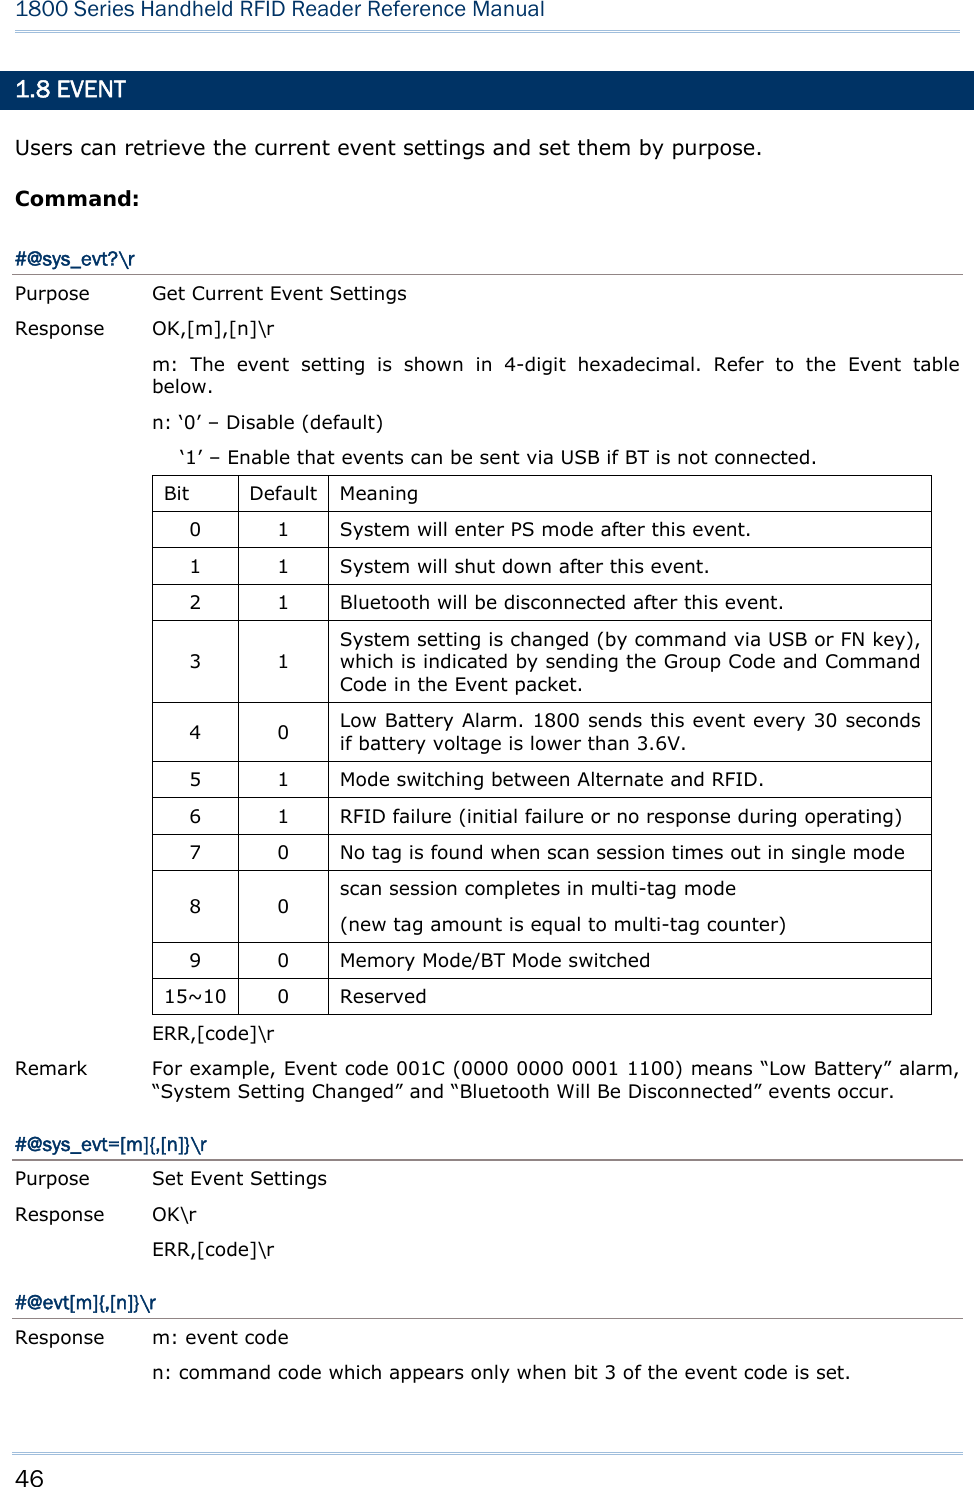 46  1800 Series Handheld RFID Reader Reference Manual  1.8 EVENT Users can retrieve the current event settings and set them by purpose. Command: #@sys_evt?\r  Purpose  Get Current Event Settings Response OK,[m],[n]\r m: The event setting is shown in 4-digit hexadecimal. Refer to the Event table below. n: ‘0’ – Disable (default) ‘1’ – Enable that events can be sent via USB if BT is not connected. Bit Default Meaning 0  1  System will enter PS mode after this event. 1  1  System will shut down after this event. 2  1  Bluetooth will be disconnected after this event. 3 1 System setting is changed (by command via USB or FN key), which is indicated by sending the Group Code and Command Code in the Event packet. 4 0 Low Battery Alarm. 1800 sends this event every 30 seconds if battery voltage is lower than 3.6V. 5  1  Mode switching between Alternate and RFID. 6  1  RFID failure (initial failure or no response during operating) 7  0  No tag is found when scan session times out in single mode 8 0 scan session completes in multi-tag mode (new tag amount is equal to multi-tag counter) 9  0  Memory Mode/BT Mode switched 15~10 0 Reserved ERR,[code]\r Remark  For example, Event code 001C (0000 0000 0001 1100) means “Low Battery” alarm, “System Setting Changed” and “Bluetooth Will Be Disconnected” events occur. #@sys_evt=[m]{,[n]}\r Purpose  Set Event Settings Response OK\r ERR,[code]\r #@evt[m]{,[n]}\r Response  m: event code n: command code which appears only when bit 3 of the event code is set. 